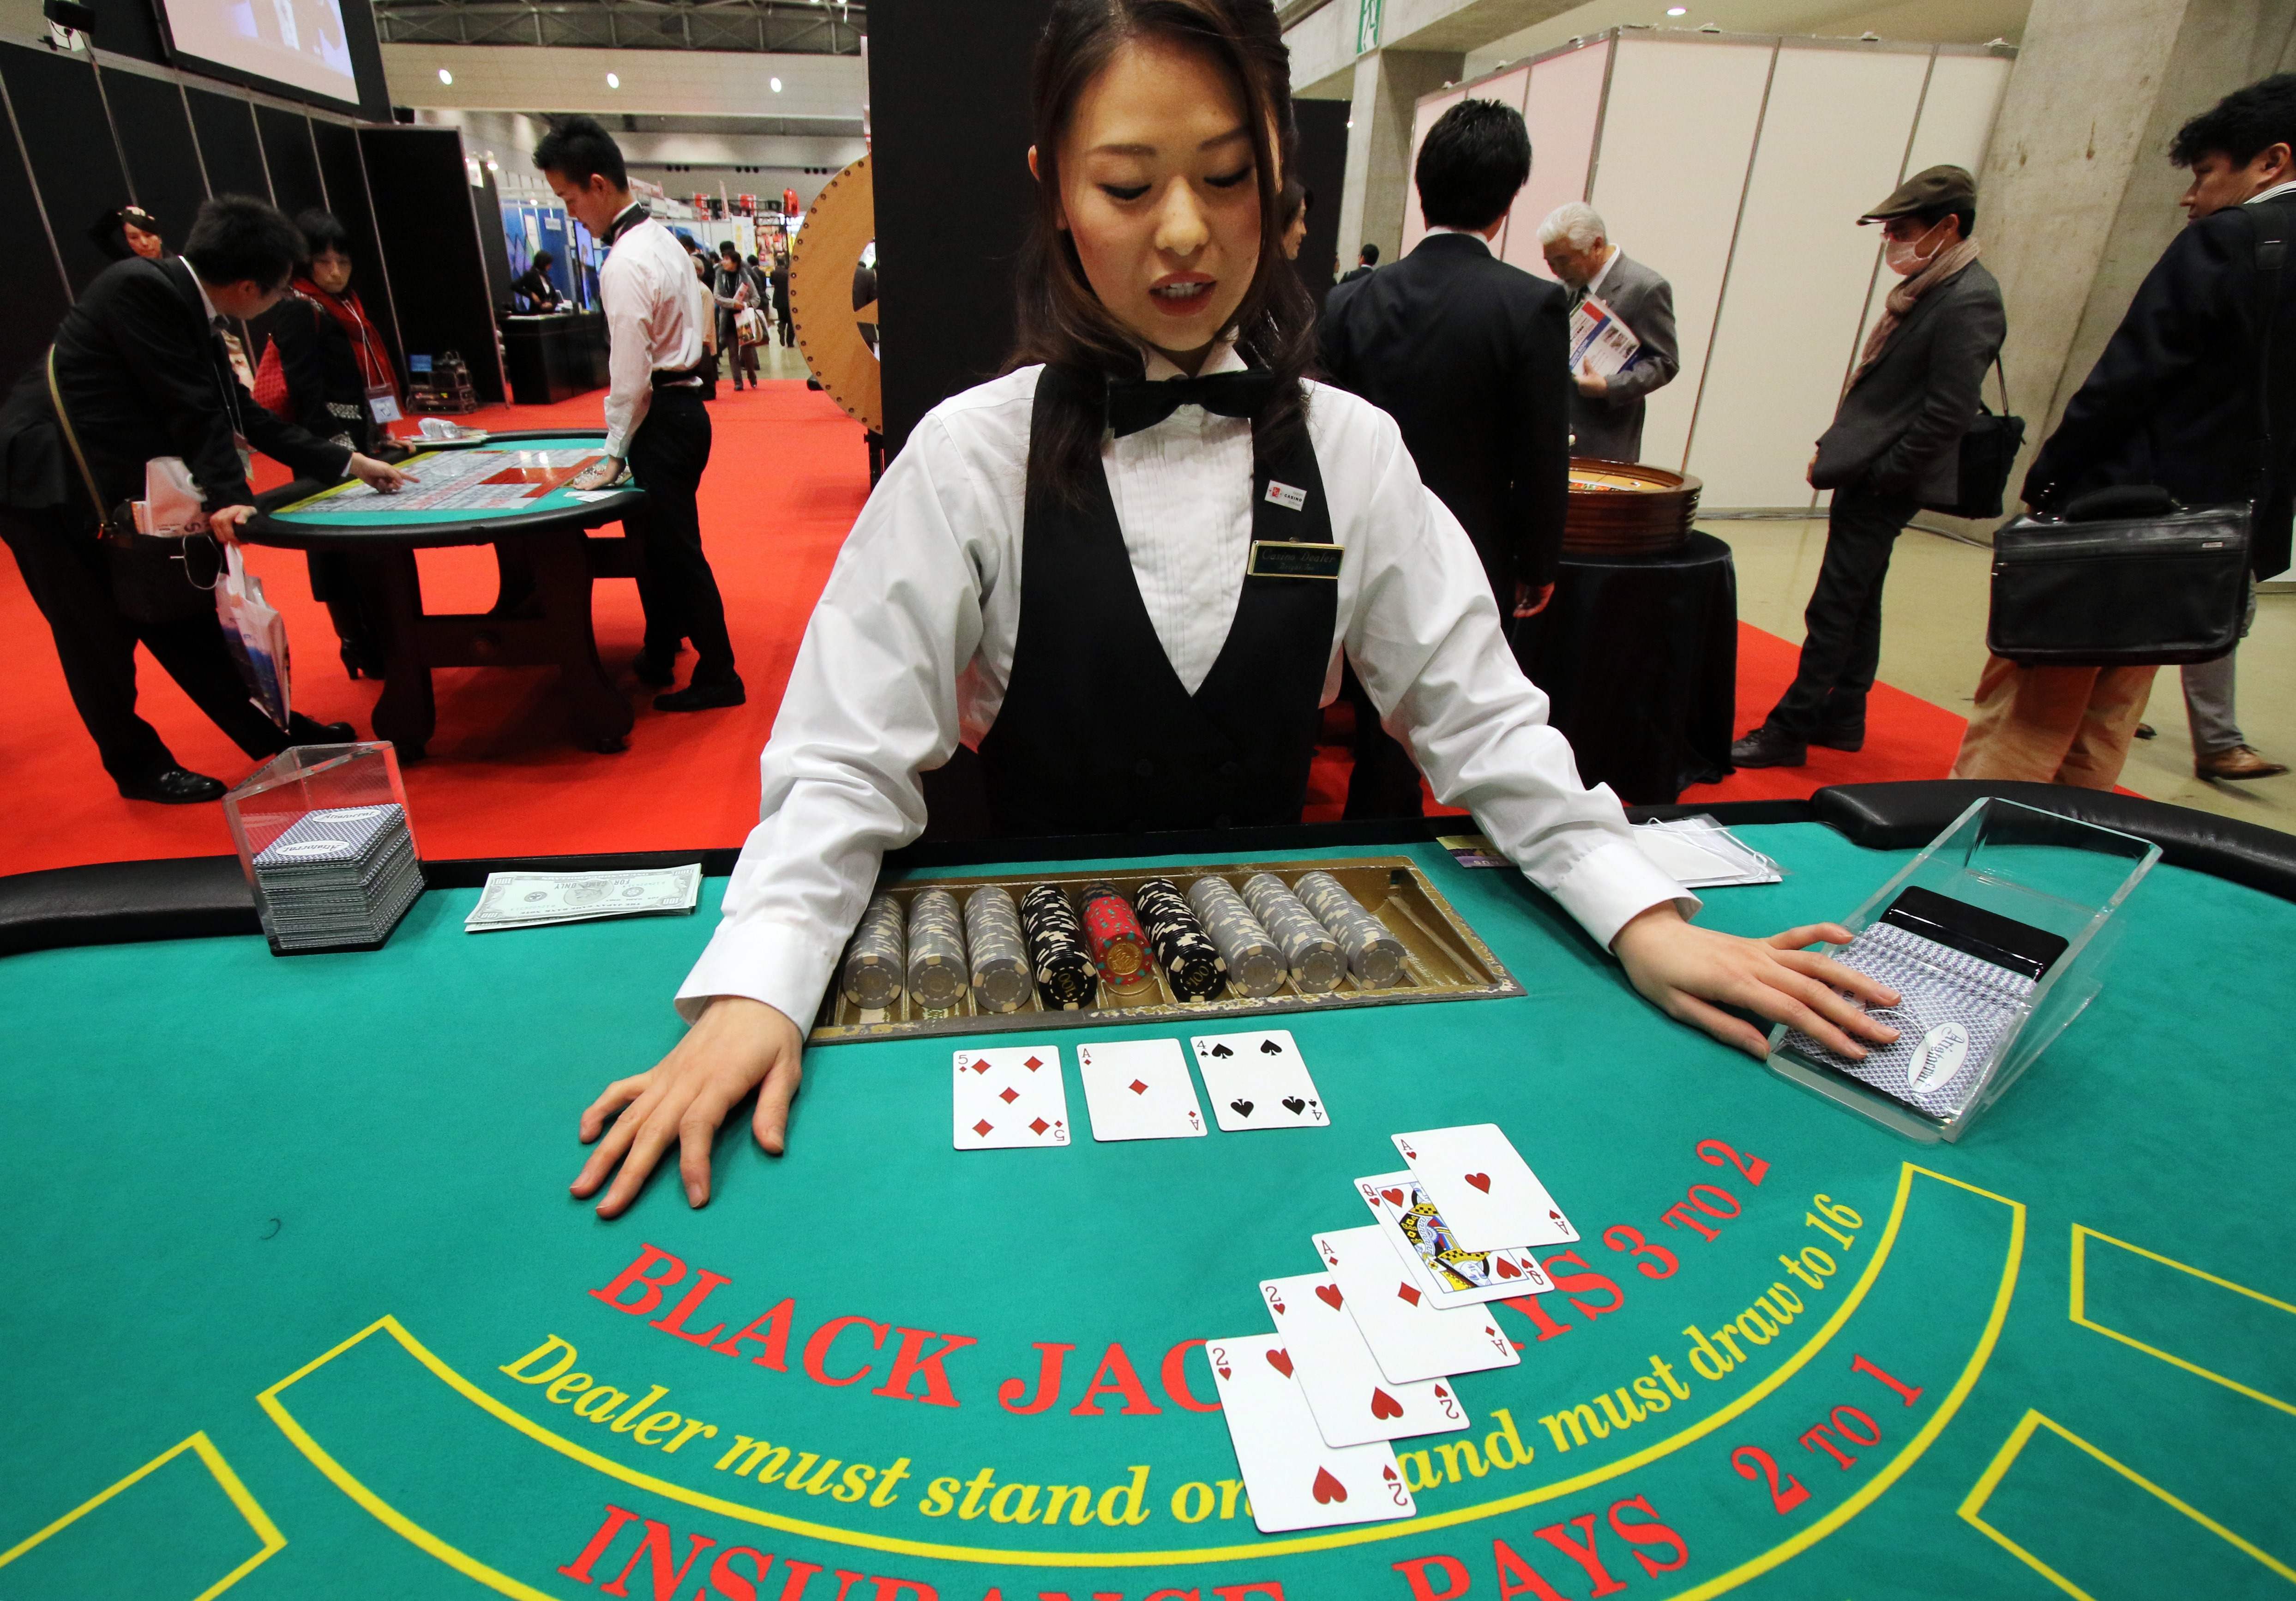 Blackjack player who left casino to rob a bank handed prison sentence